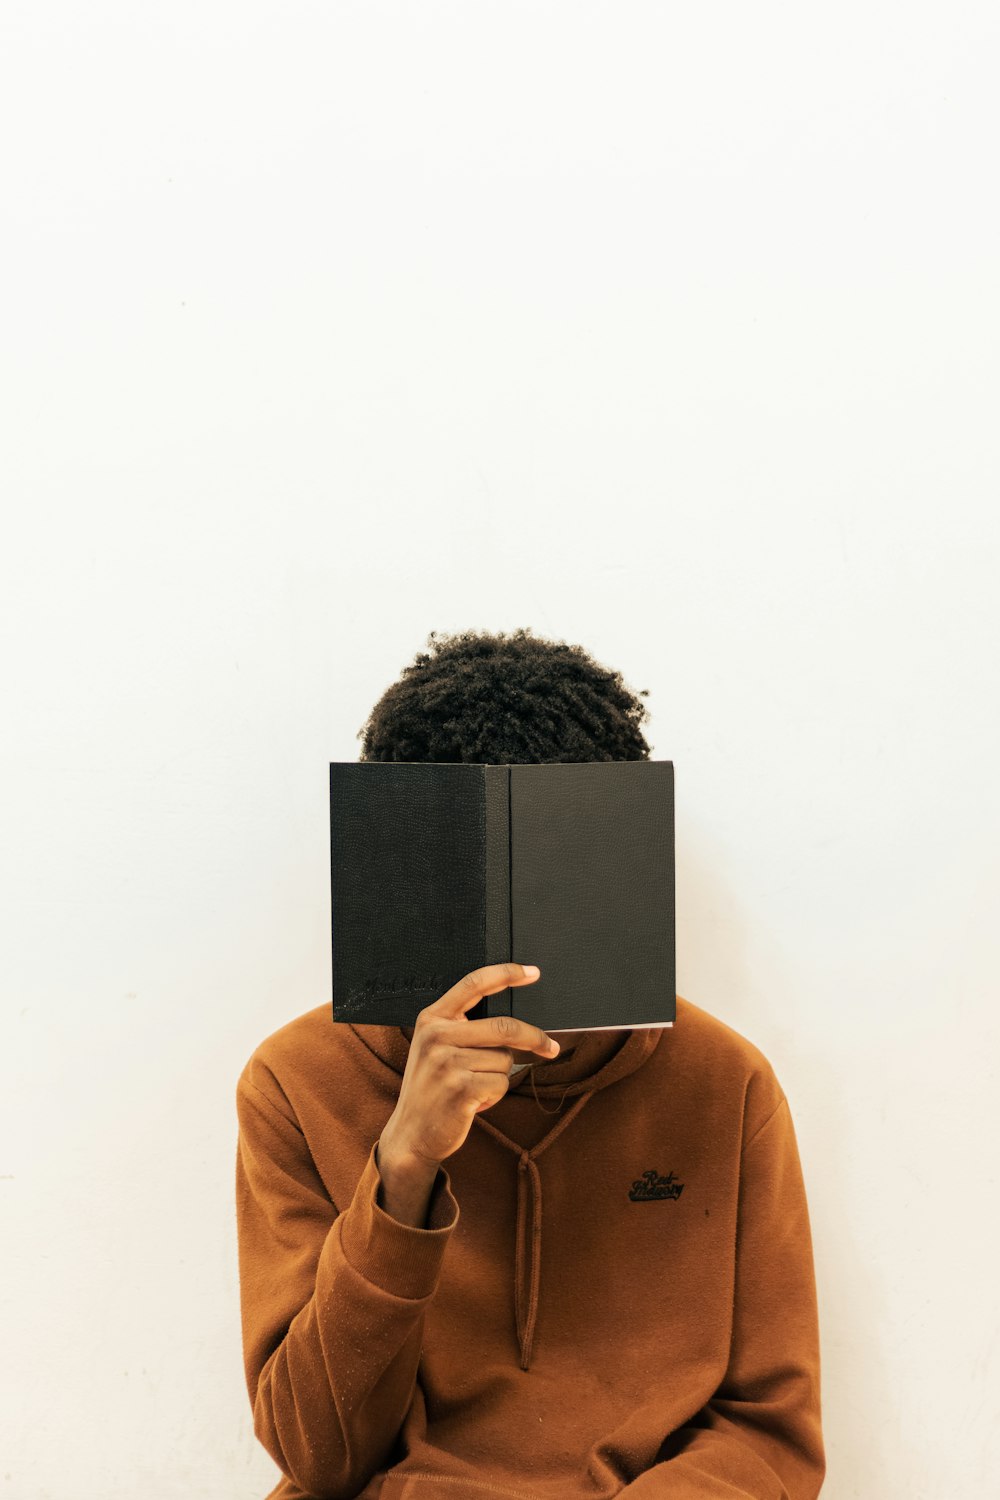 a person with a book covering their face